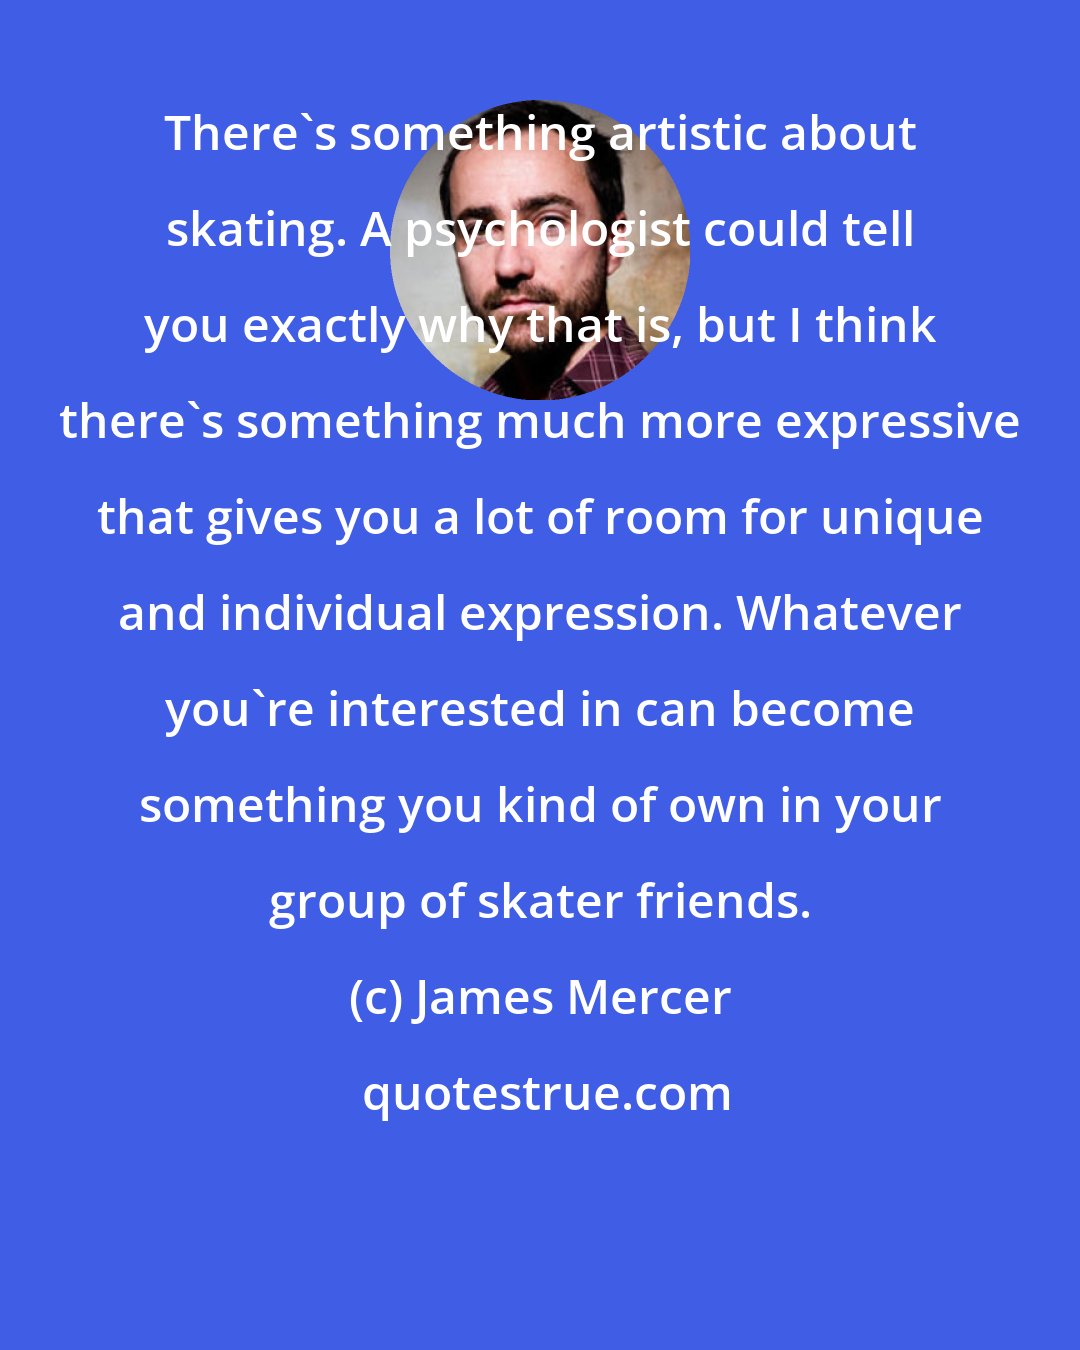 James Mercer: There's something artistic about skating. A psychologist could tell you exactly why that is, but I think there's something much more expressive that gives you a lot of room for unique and individual expression. Whatever you're interested in can become something you kind of own in your group of skater friends.